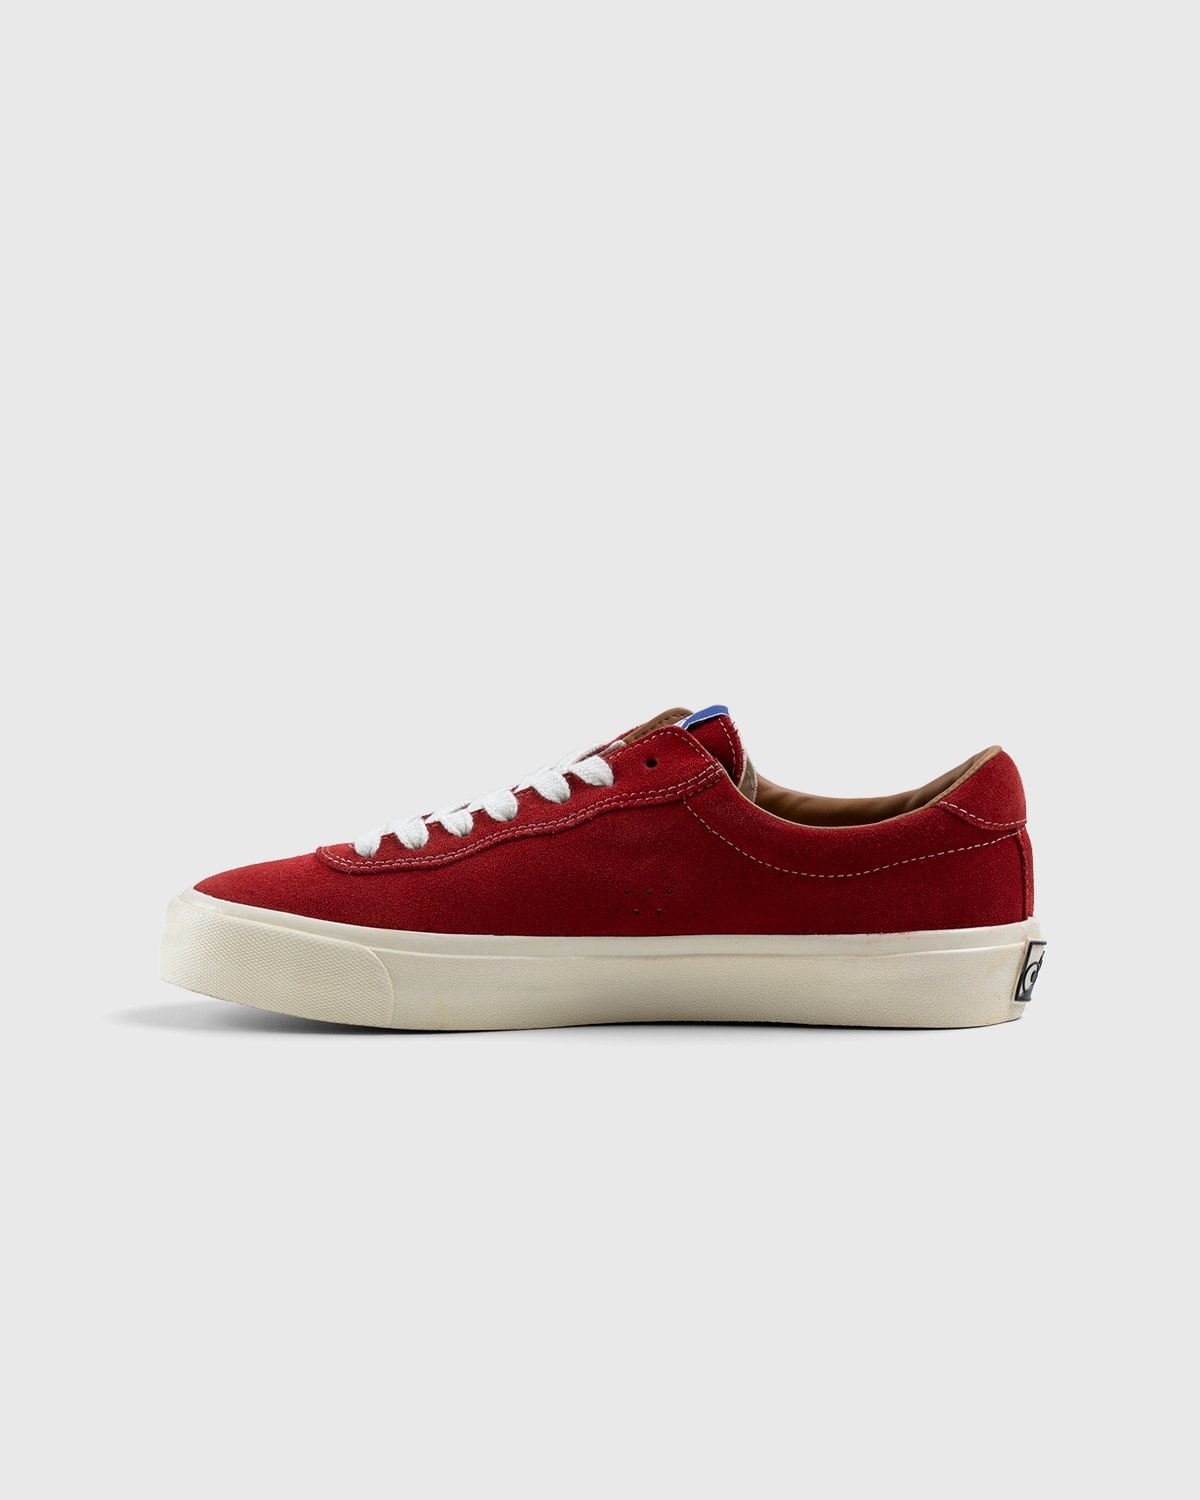 Last Resort AB – VM001 Lo Suede Old Red/White - Low Top Sneakers - Red - Image 2